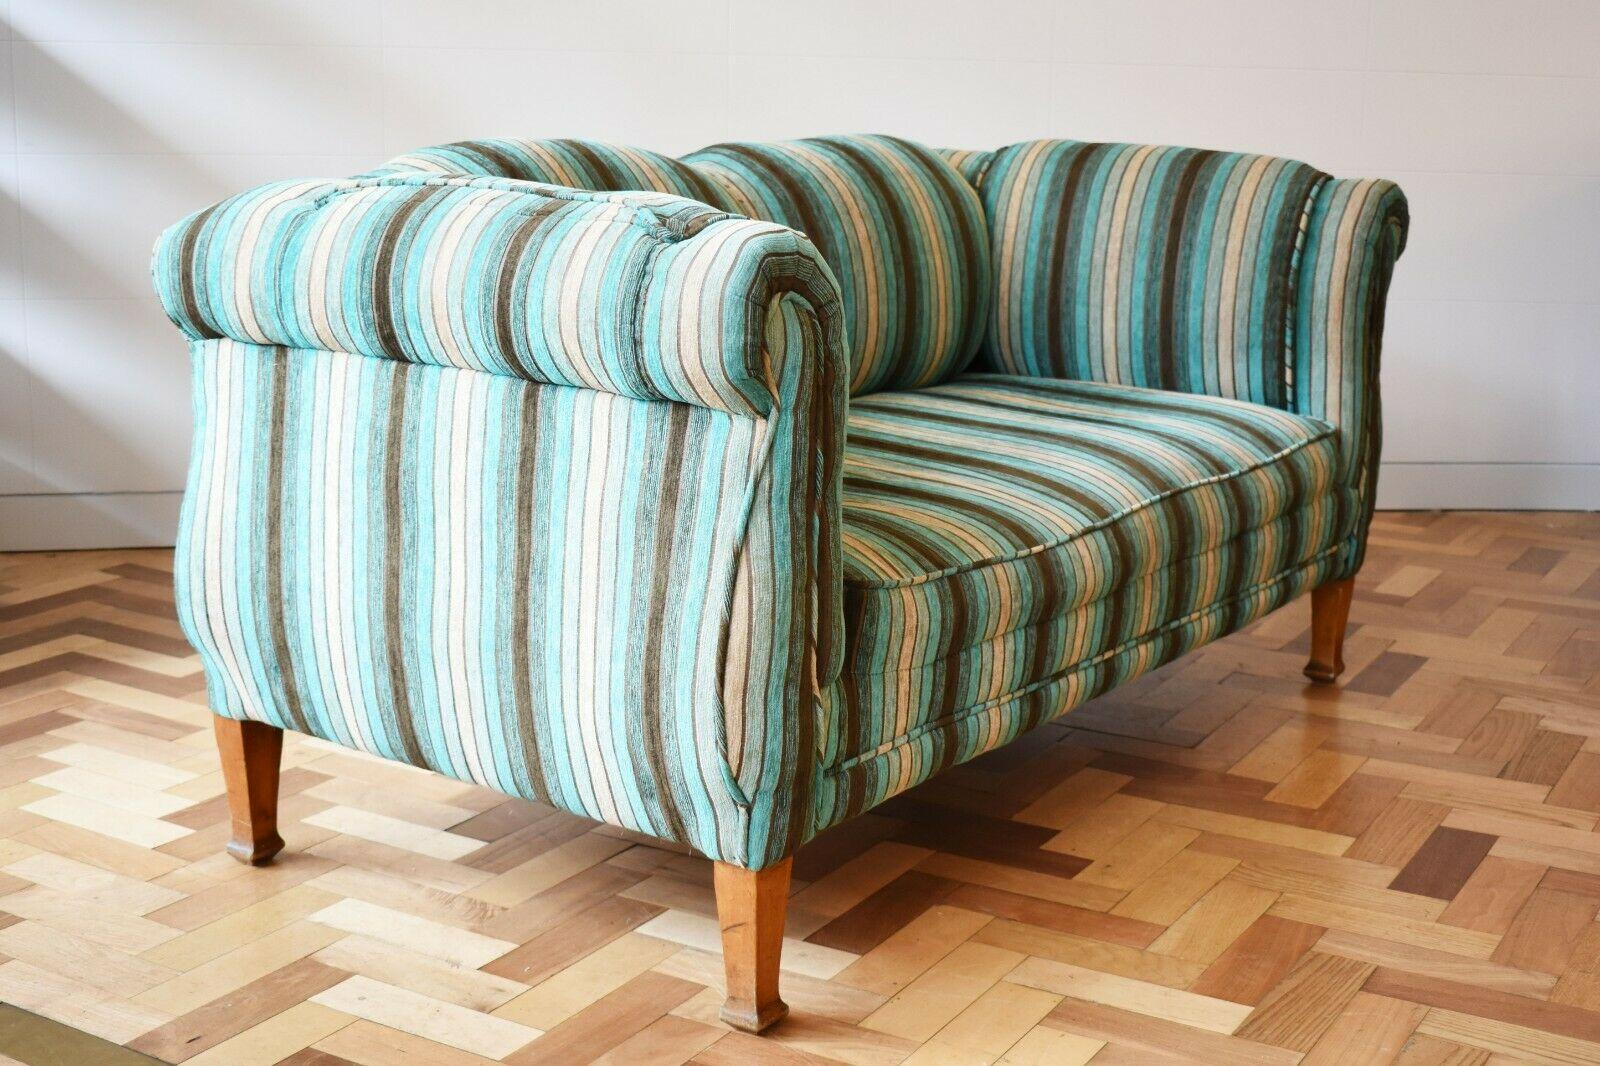 This early 20th century Italian striped two seater sofa features interesting curved shapes throughout that accentuate the beauty of the high quality cotton velvet blue, green and grey coloured fabric. Set on wooden legs, this is a beautiful and